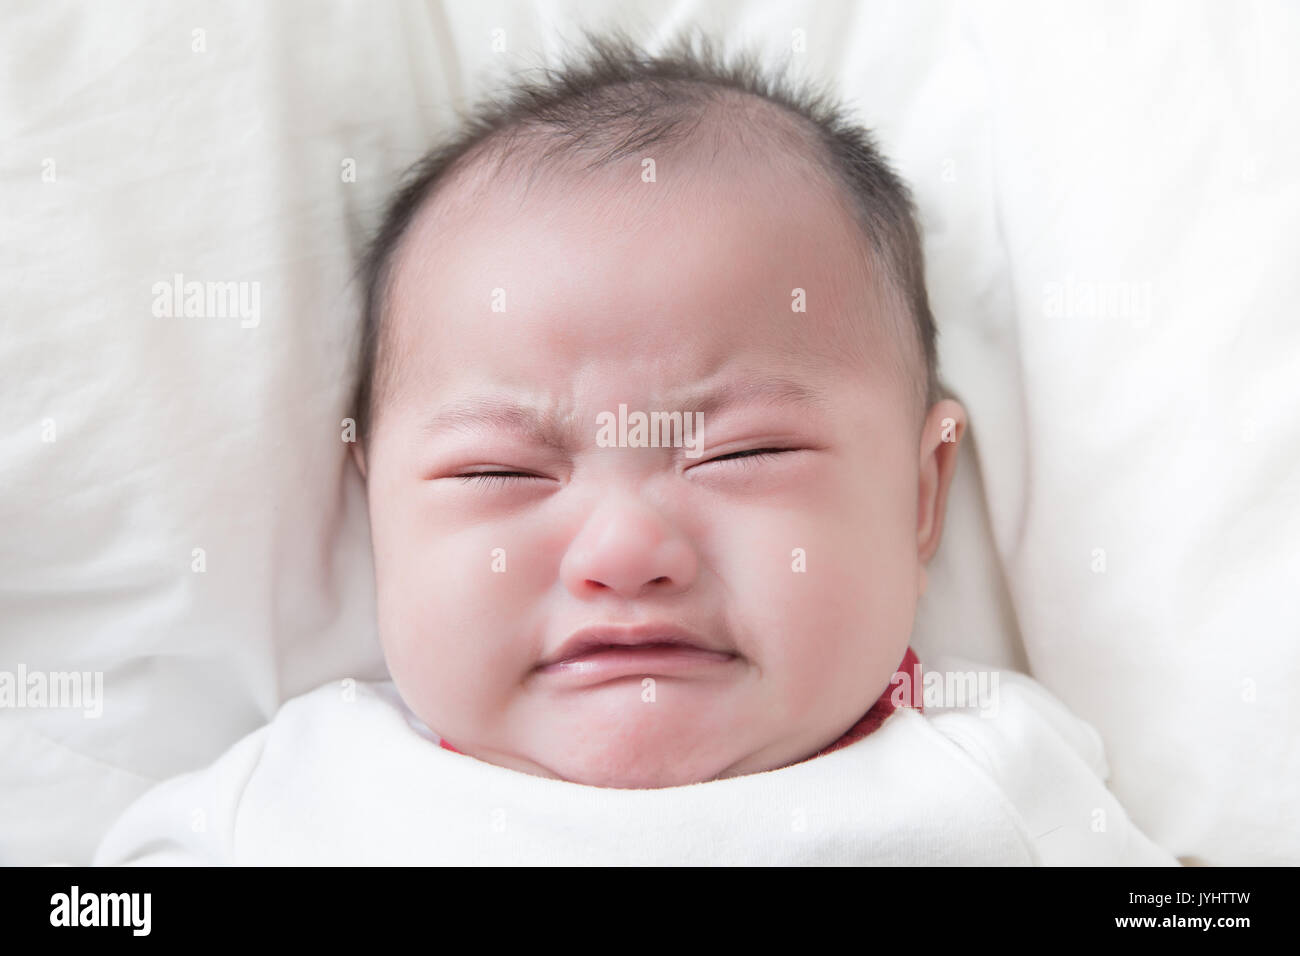 Asian baby boy crying on lit blanc Banque D'Images